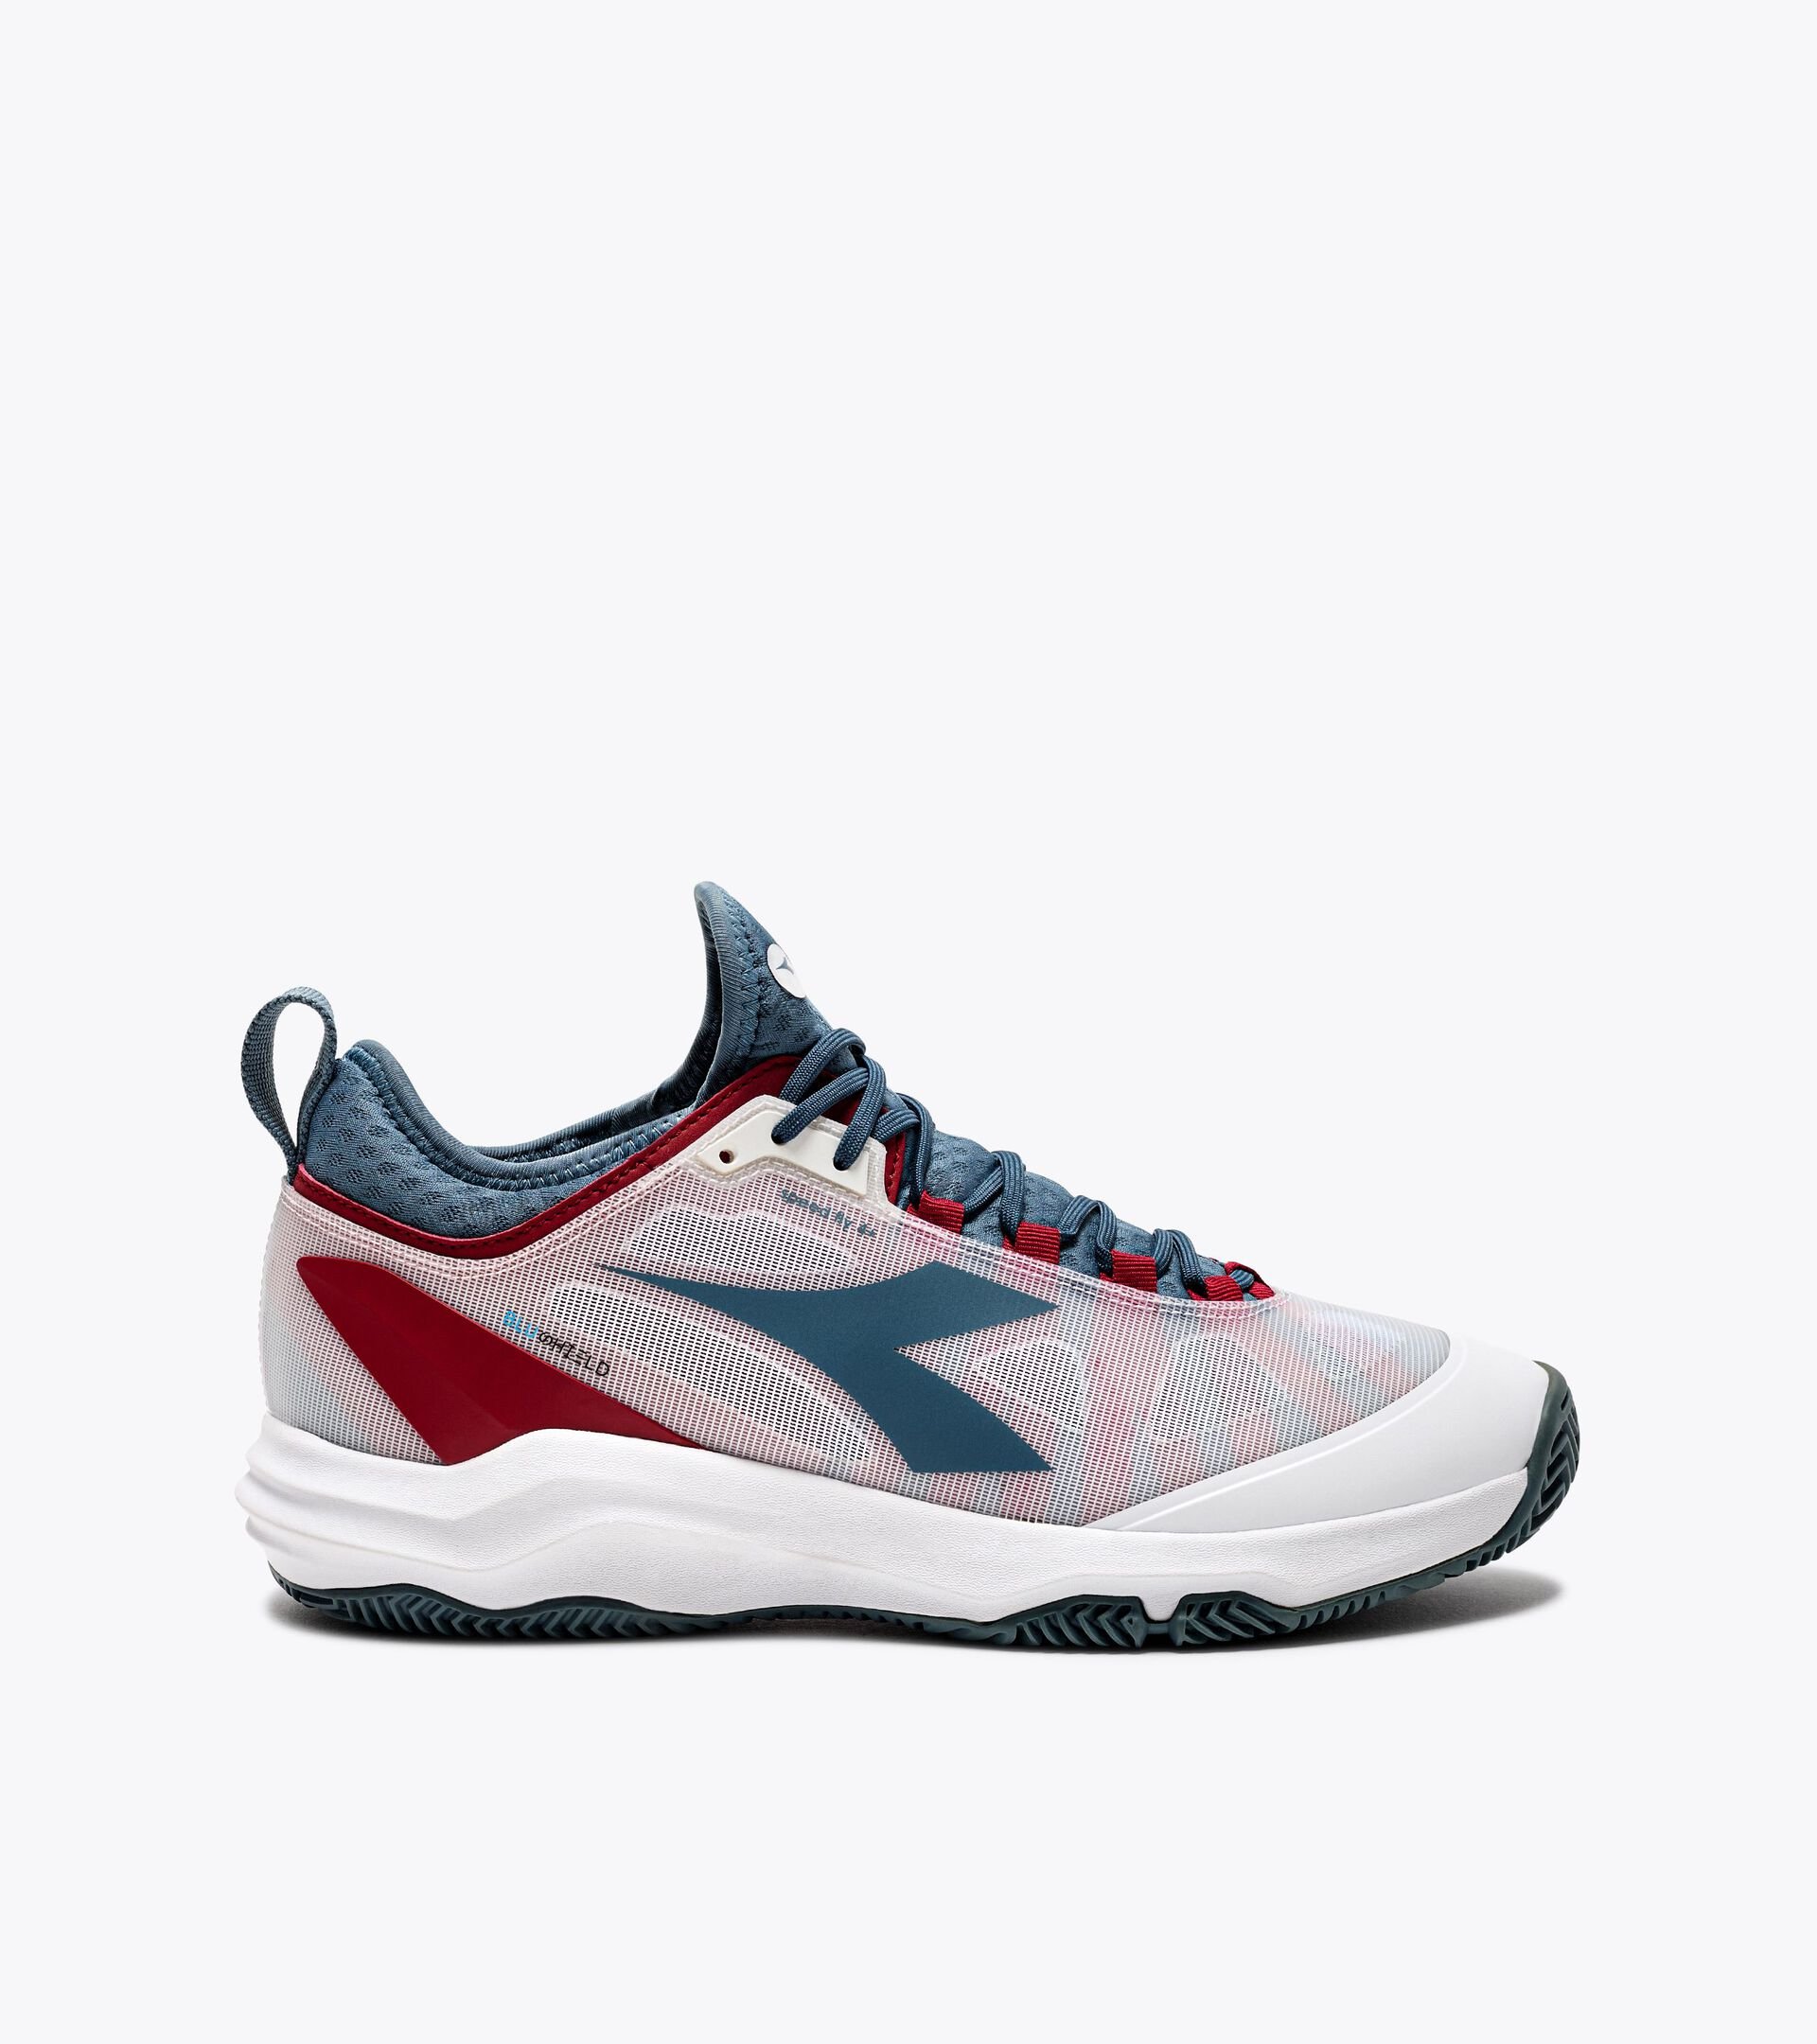 Tennis shoes for clay courts - Men SPEED BLUSHIELD FLY 4 + CLAY WHITE/OCEANVIEW/SALSA - Diadora